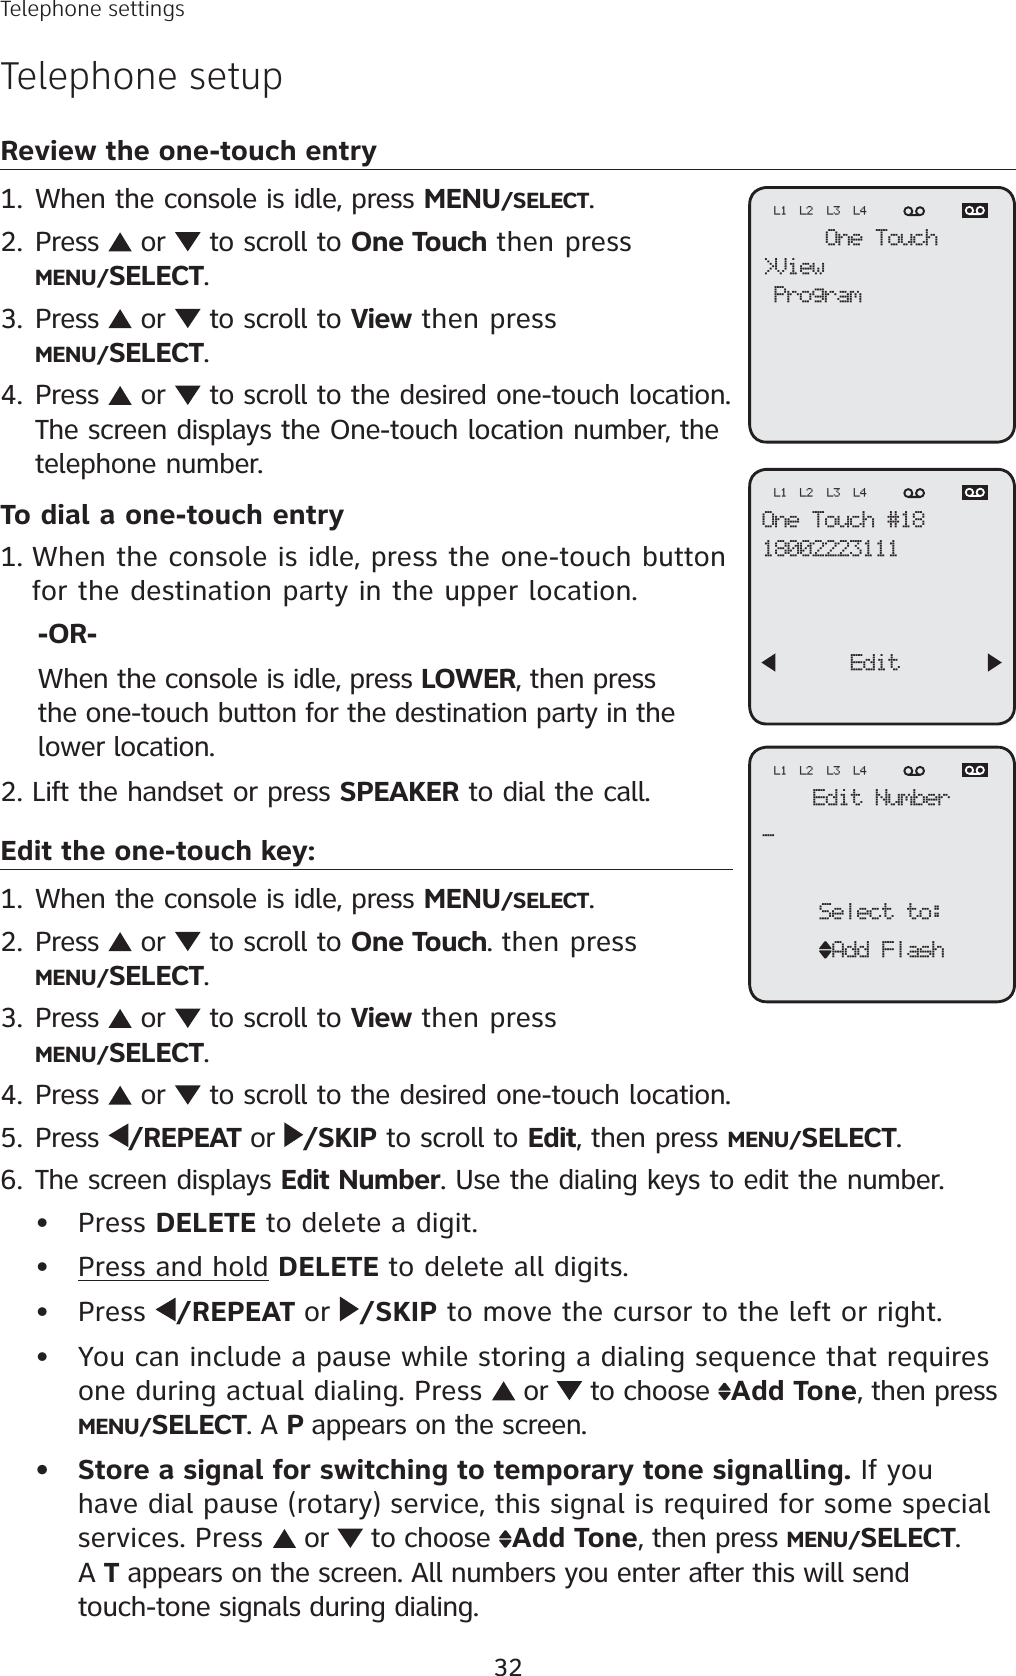 32Telephone settingsTelephone setupReview the one-touch entryWhen the console is idle, press MENU/SELECT.Press   or   to scroll to One Touch then pressMENU/SELECT.Press   or   to scroll to View then pressMENU/SELECT.Press   or   to scroll to the desired one-touch location.The screen displays the One-touch location number, the telephone number.To dial a one-touch entryWhen the console is idle, press the one-touch button for the destination party in the upper location.-OR-When the console is idle, press LOWER, then press the one-touch button for the destination party in the lower location.Lift the handset or press SPEAKER to dial the call.Edit the one-touch key:When the console is idle, press MENU/SELECT.Press   or   to scroll to One Touch. then pressMENU/SELECT.Press   or   to scroll to View then pressMENU/SELECT.Press   or   to scroll to the desired one-touch location. Press  /REPEAT or  /SKIP to scroll to Edit, then press MENU/SELECT.The screen displays Edit Number. Use the dialing keys to edit the number. Press DELETE to delete a digit.Press and hold DELETE to delete all digits. Press  /REPEAT or /SKIP to move the cursor to the left or right. You can include a pause while storing a dialing sequence that requires one during actual dialing. Press   or   to choose  Add Tone, then press MENU/SELECT. A P appears on the screen. Store a signal for switching to temporary tone signalling. If you have dial pause (rotary) service, this signal is required for some special services. Press   or   to choose  Add Tone, then press MENU/SELECT.A T appears on the screen. All numbers you enter after this will send touch-tone signals during dialing.1.2.3.4.1.2.1.2.3.4.5.6.•••••One Touch&gt;ViewProgramL1 L2 L3 L4One Touch #1818002223111      EditL1 L2 L3 L4Edit Number_Select to:Add FlashL1 L2 L3 L4